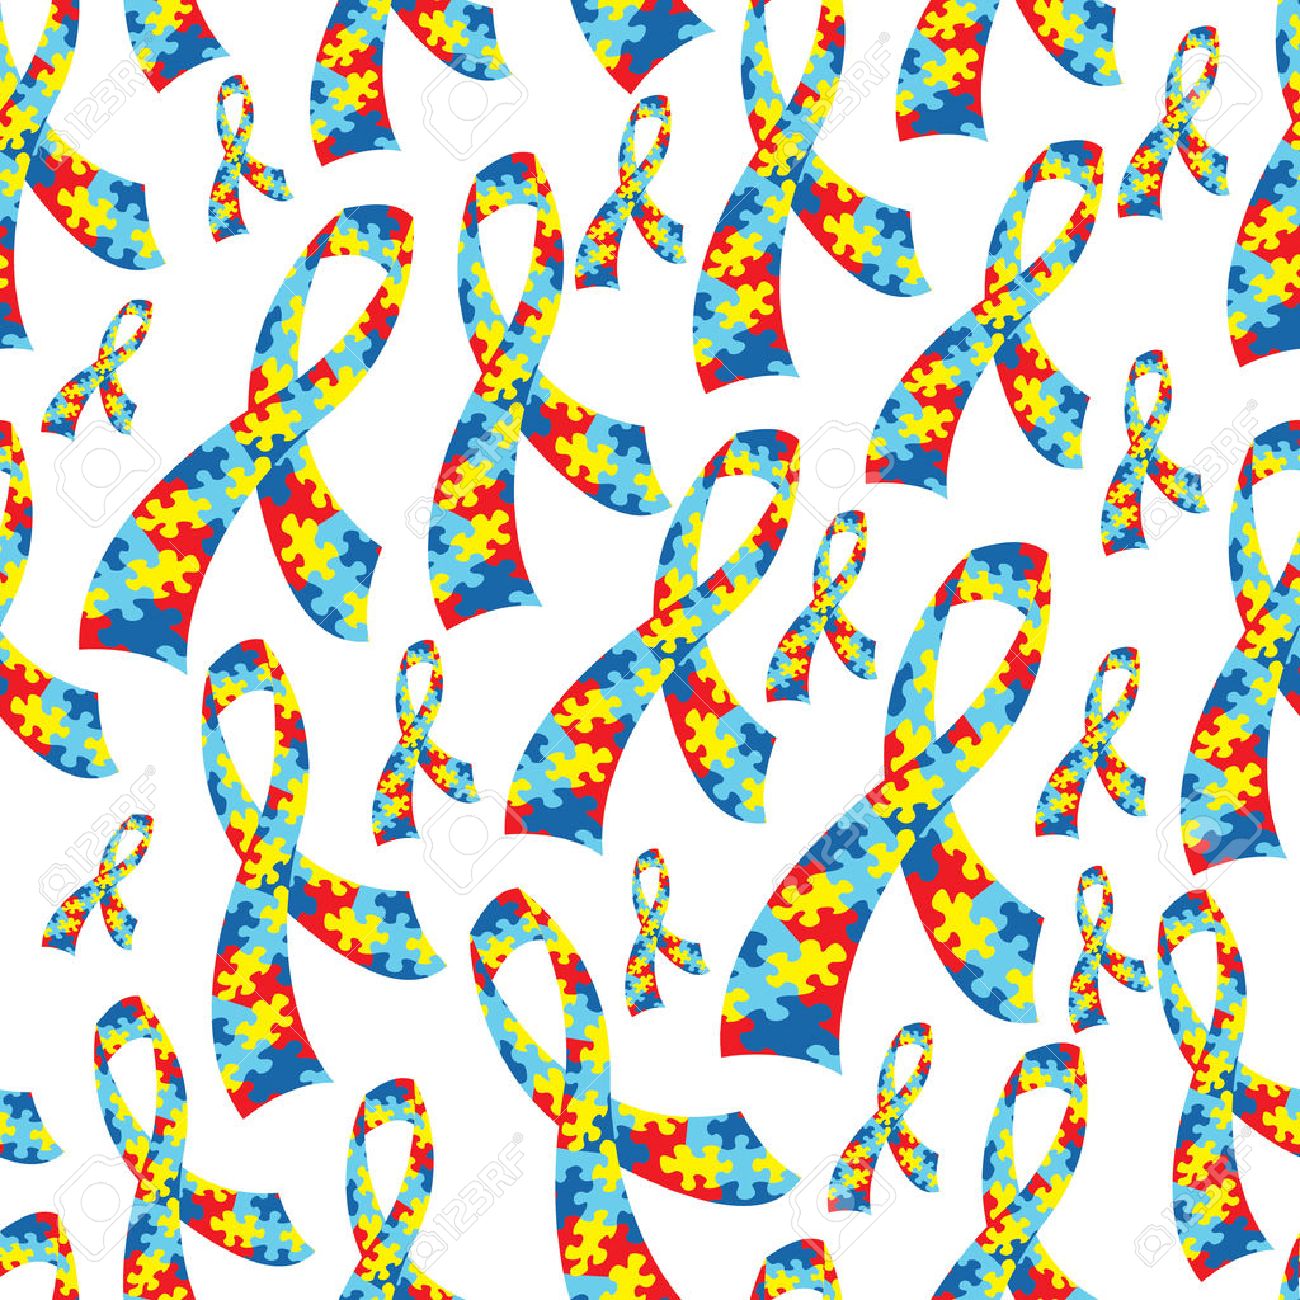 A Seamless Tiled Autism Awareness Ribbon Background Royalty